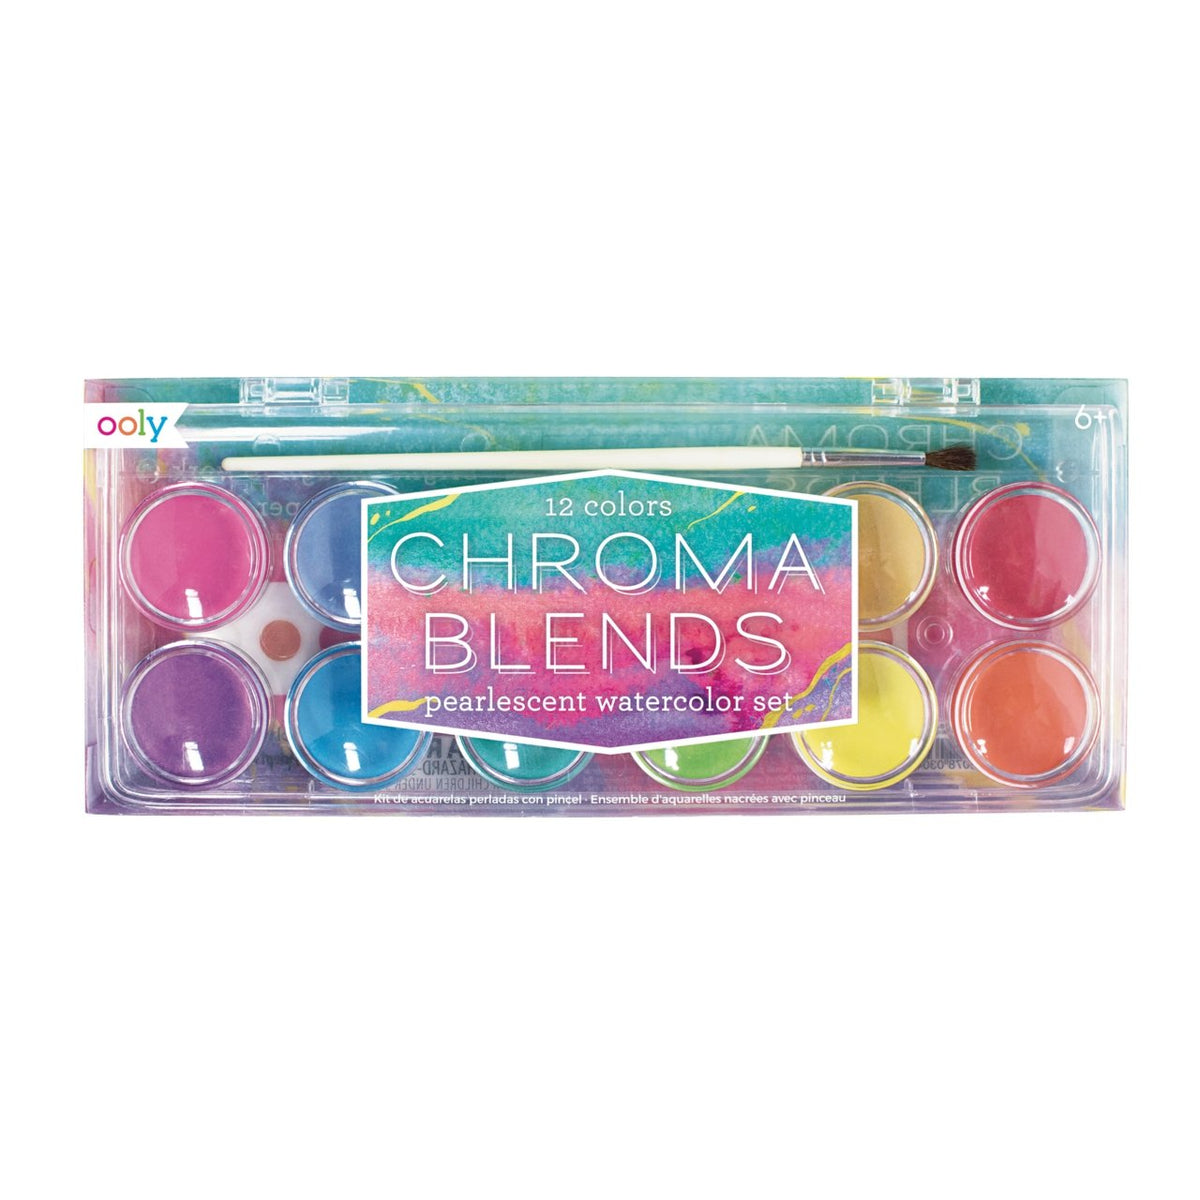 Ooly Chroma Blends Watercolor 12-Color Pearlescent Set with Brush - merriartist.com